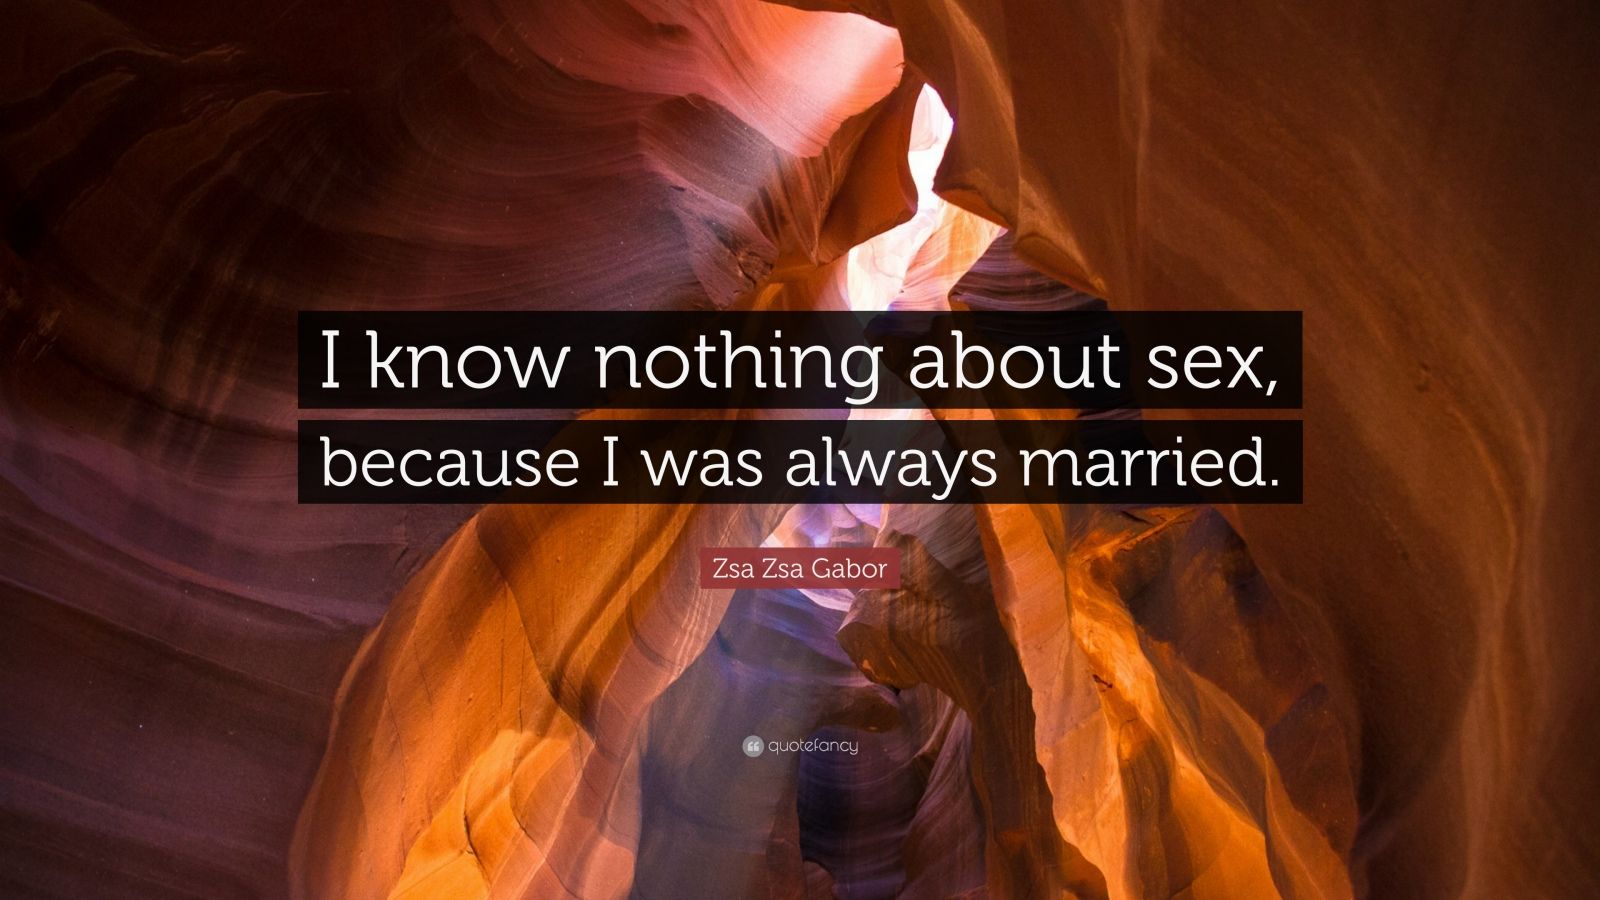 Zsa Zsa Gabor Quote “i Know Nothing About Sex Because I Was Always Married” 0184